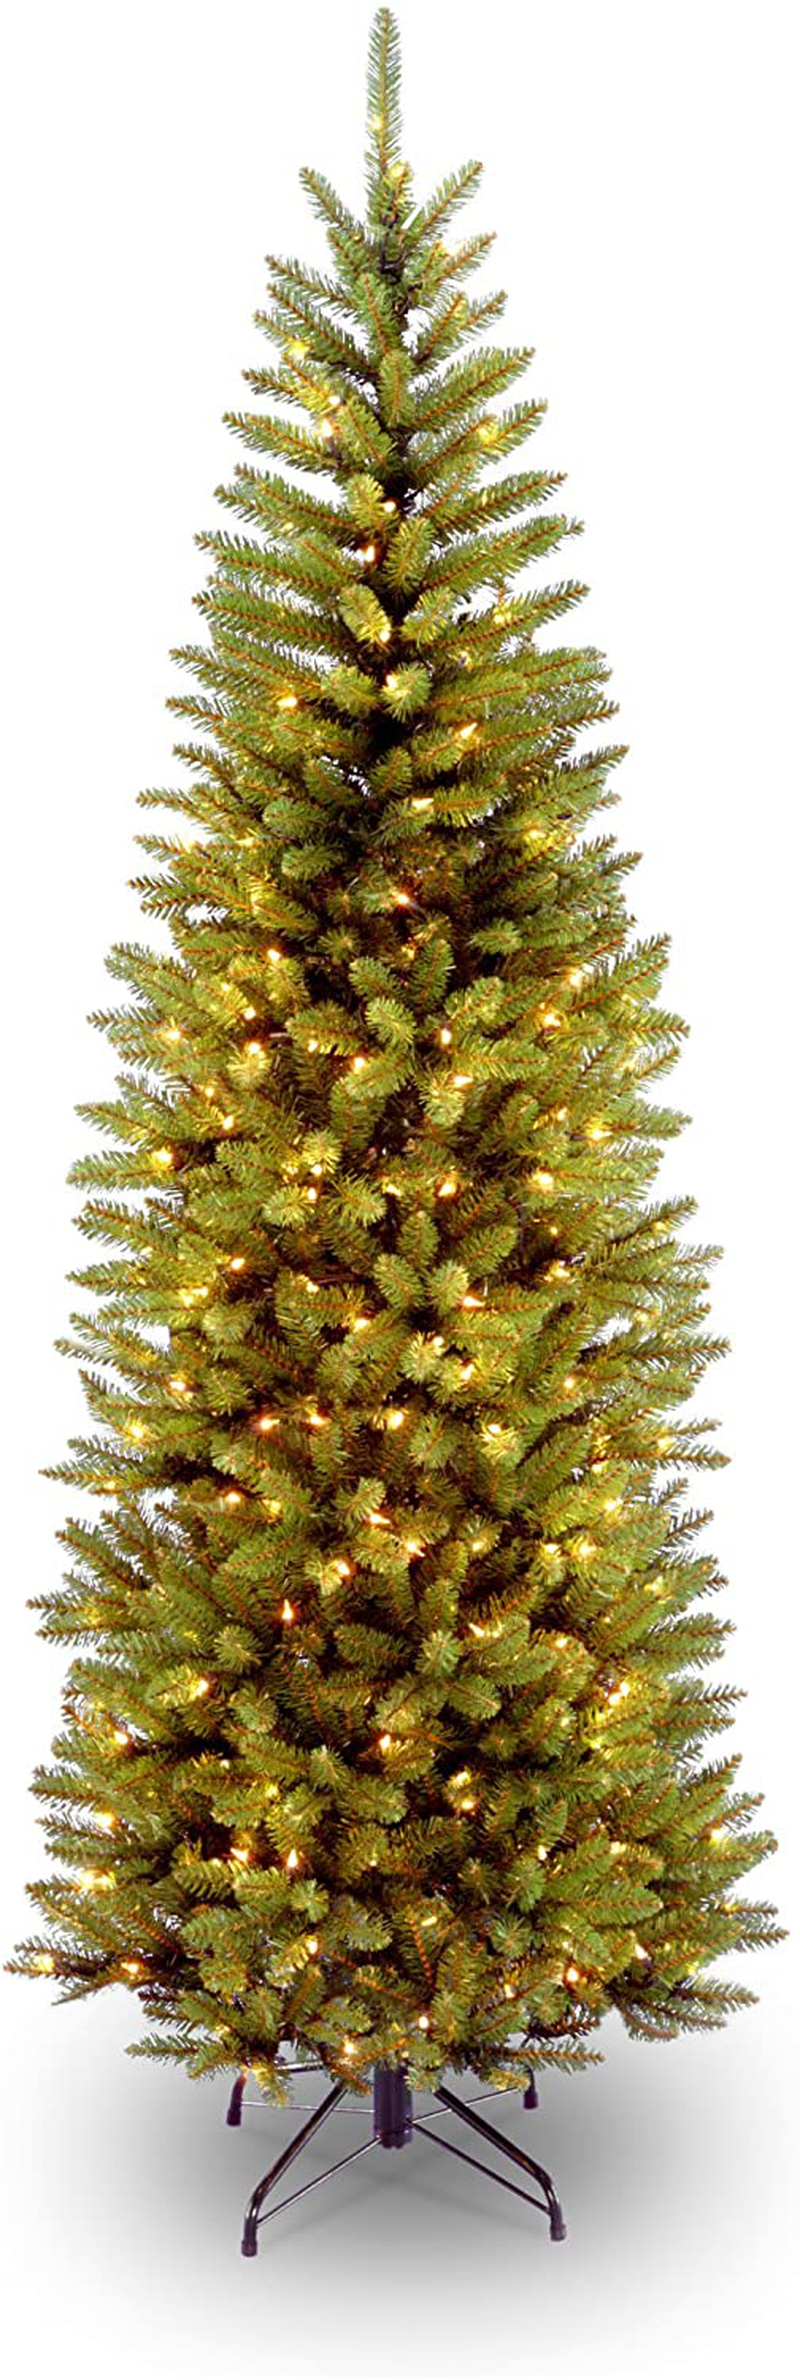 National Tree Company lit Artificial Christmas Tree Includes Pre-Strung White Lights and Stand, 6.5 ft, Green Home & Garden > Decor > Seasonal & Holiday Decorations > Christmas Tree Stands National Tree Company 6.5 ft  